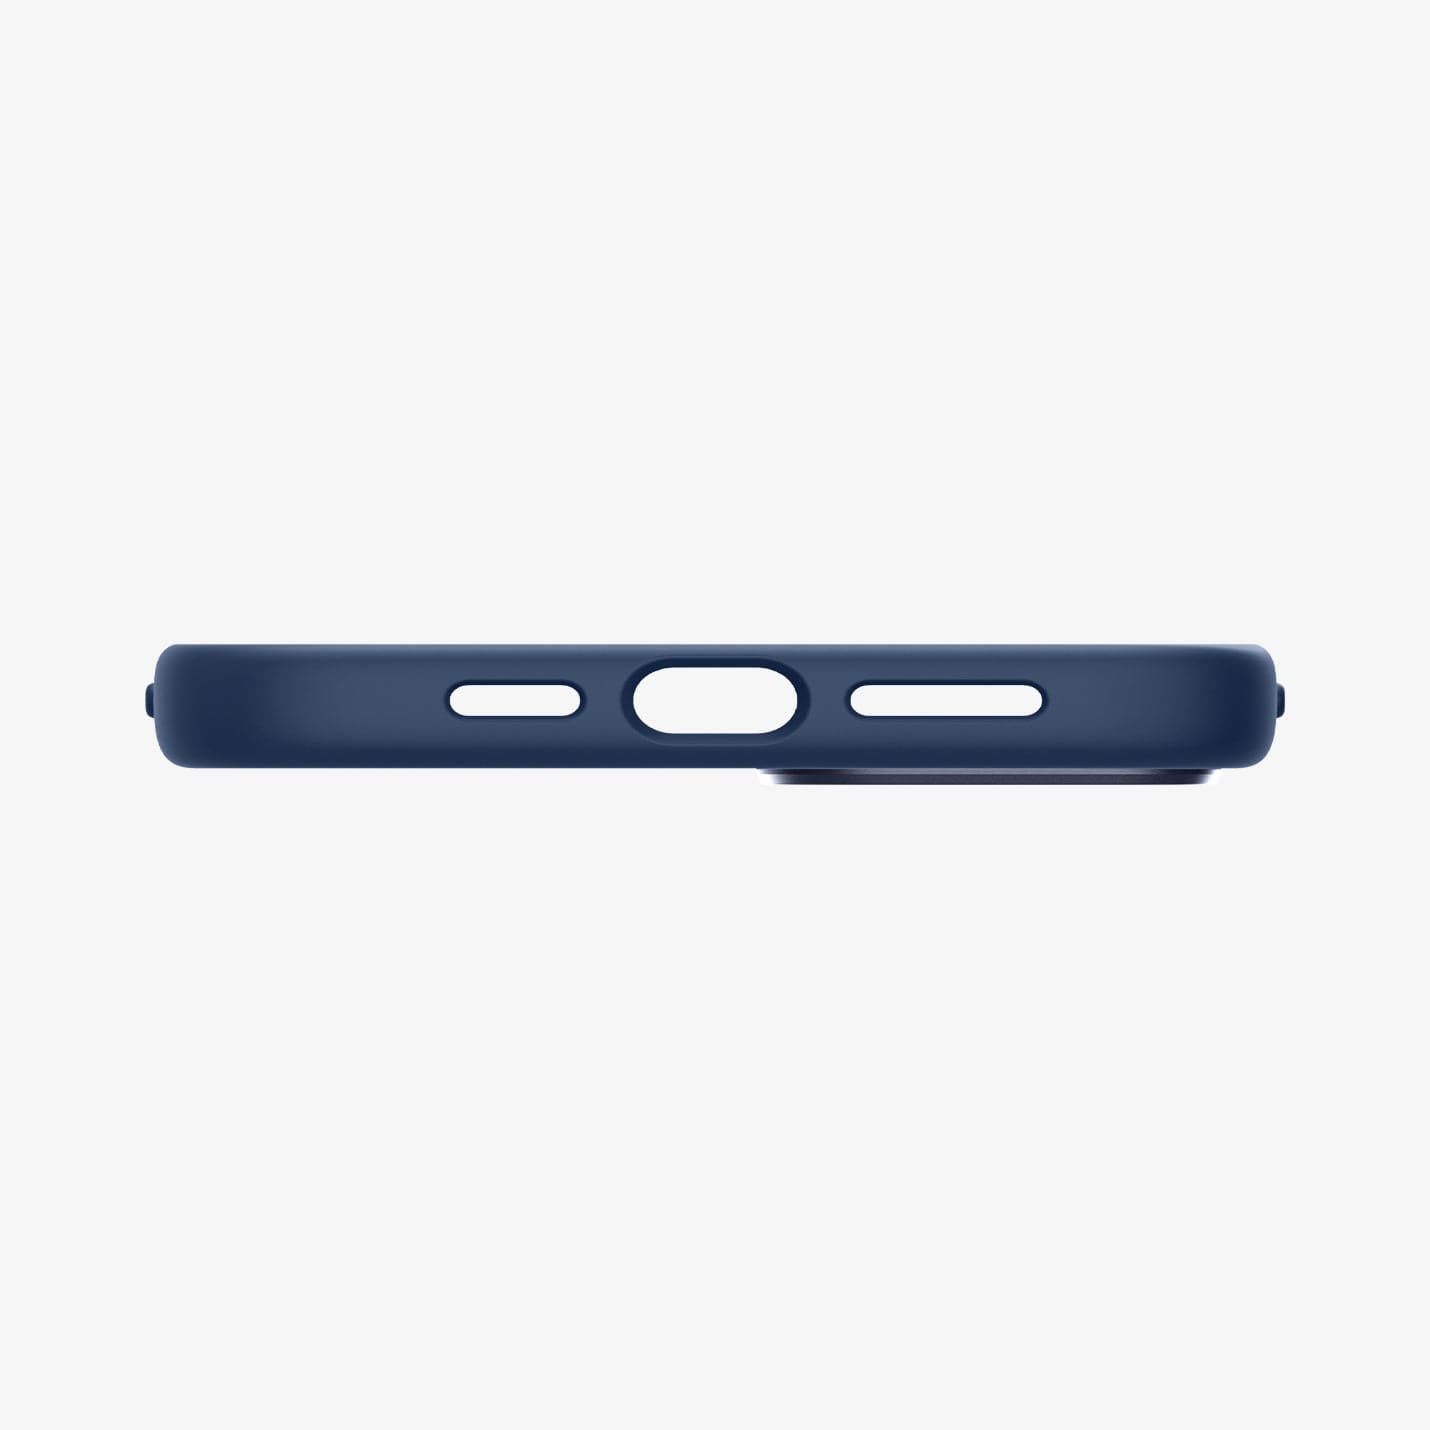 ACS05068 - iPhone 14 Case Silicone Fit (MagFit) in navy blue showing the bottom with precise cutouts